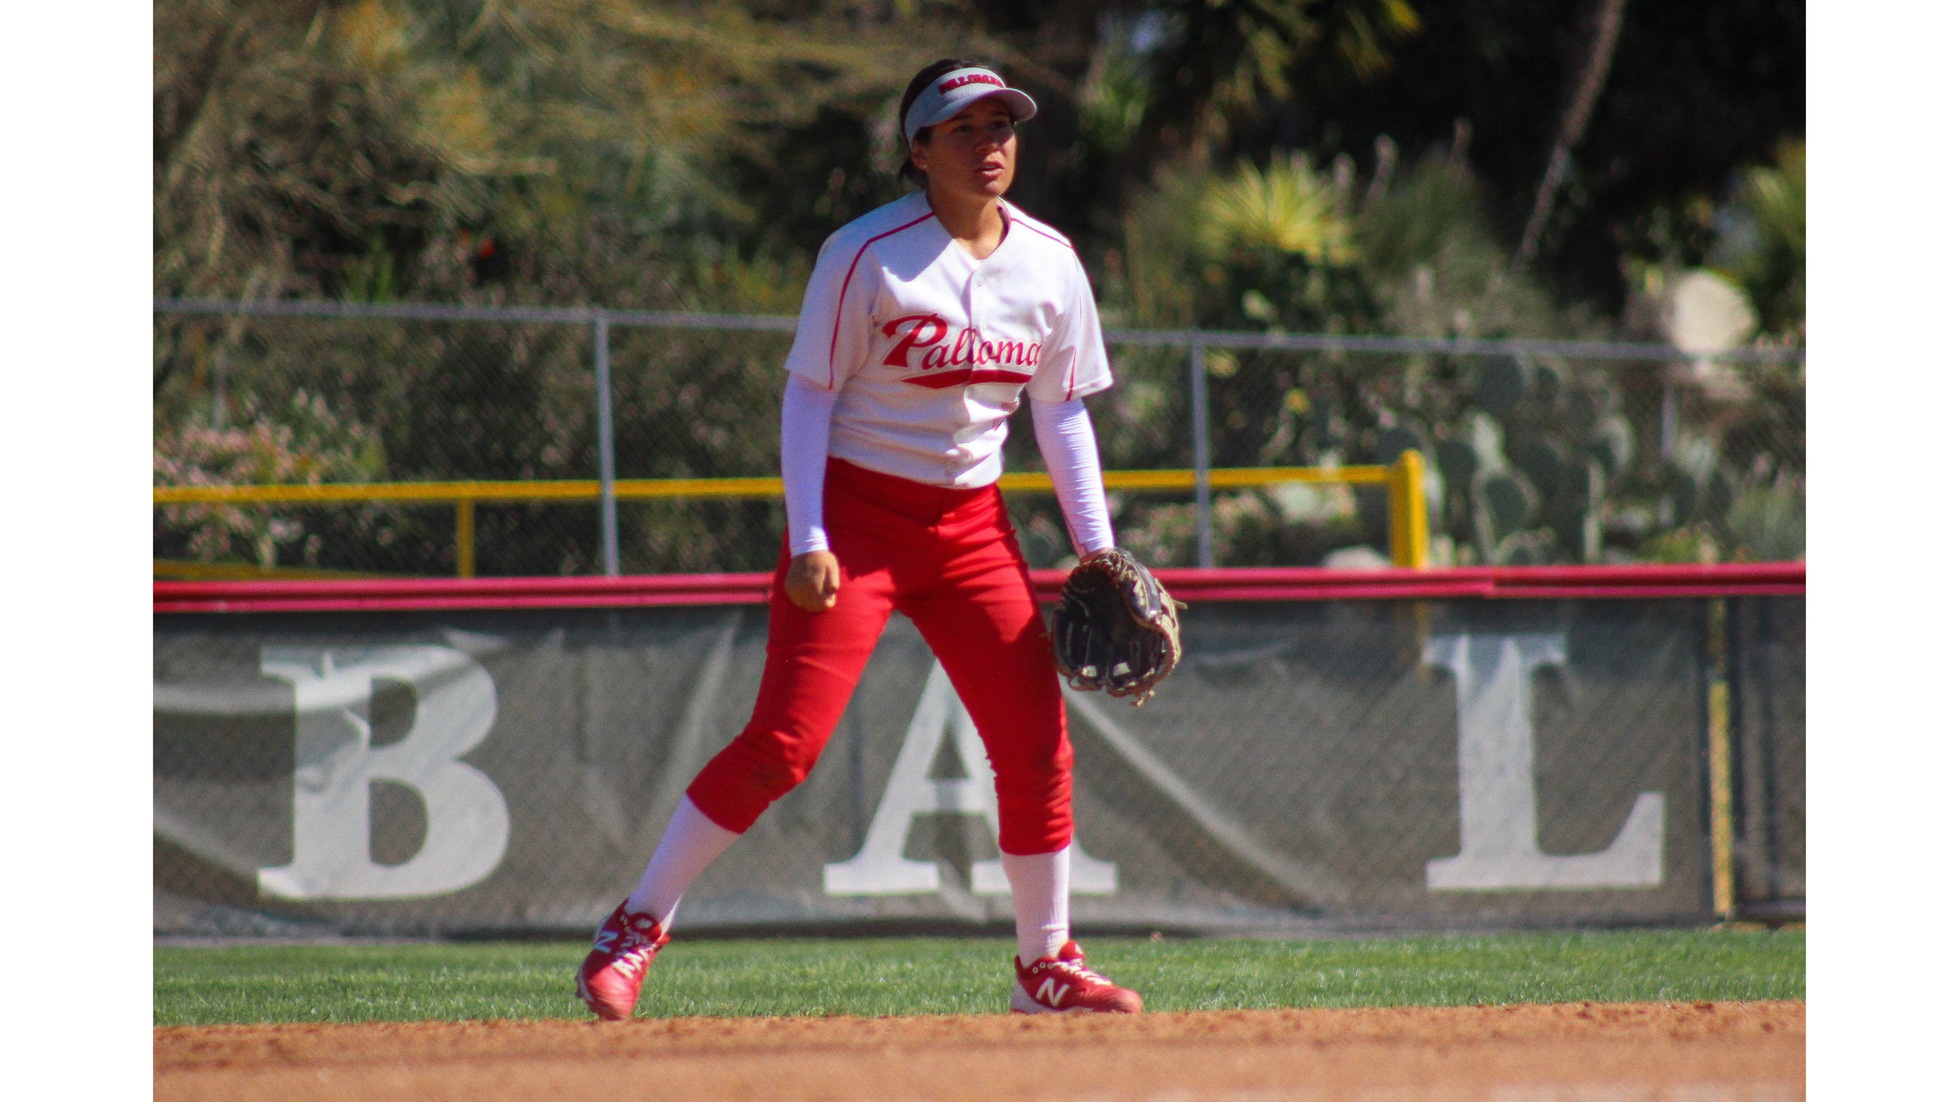 Ayiana Hernandez scored one run in the fifth for the Comets after hitting a single to centerfield.